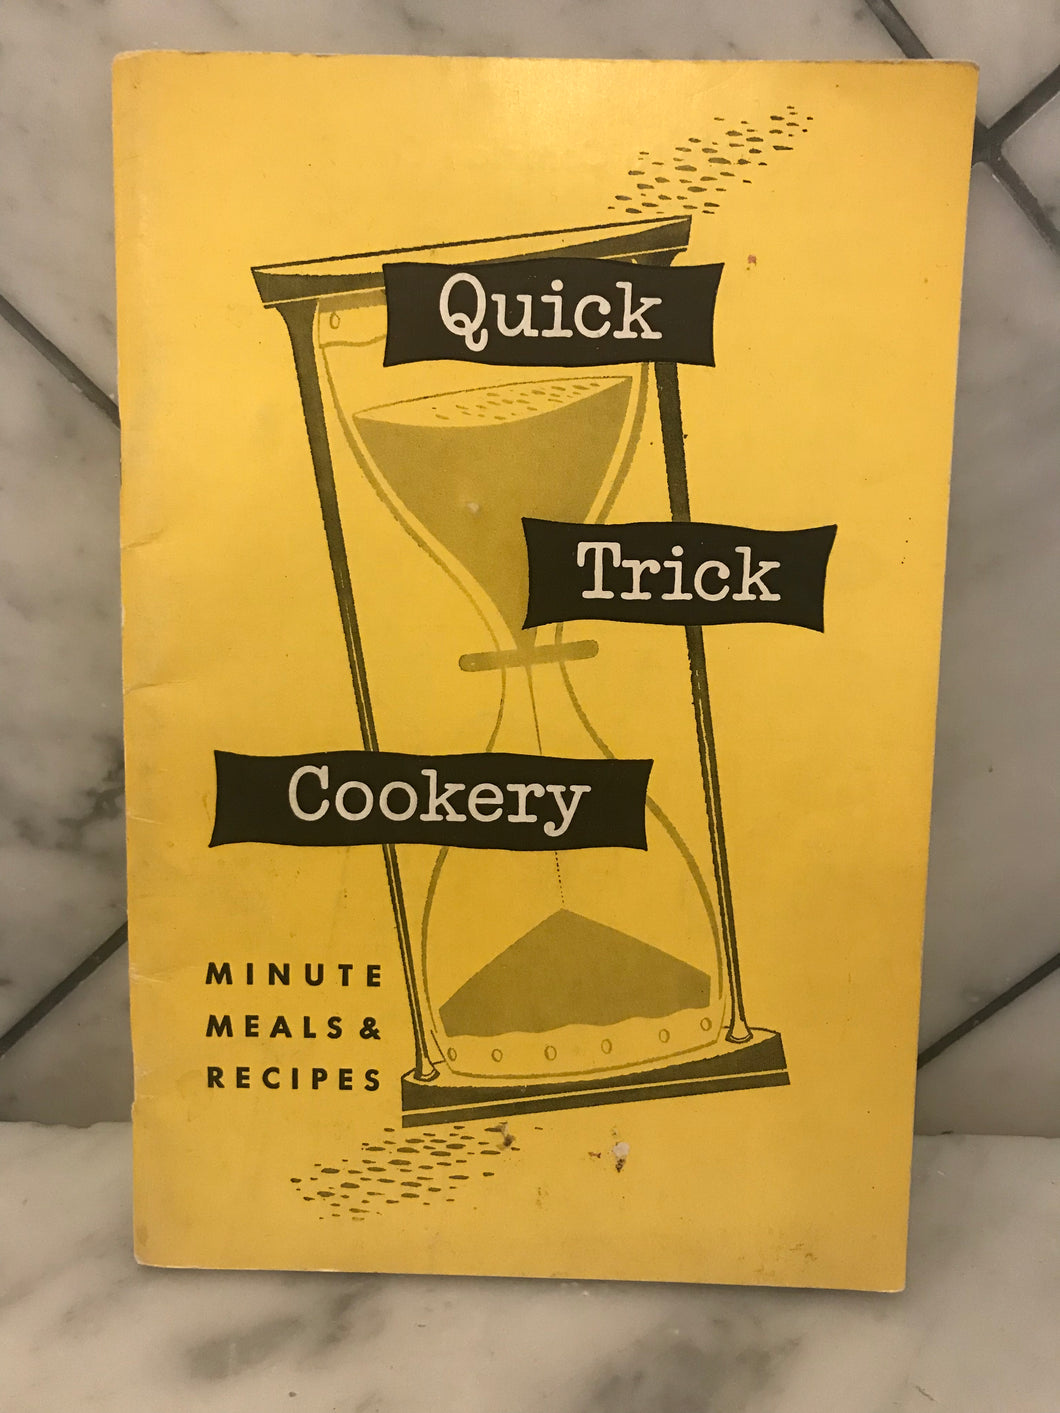 Quick Trick Cookery, Minute Meals & Recipes